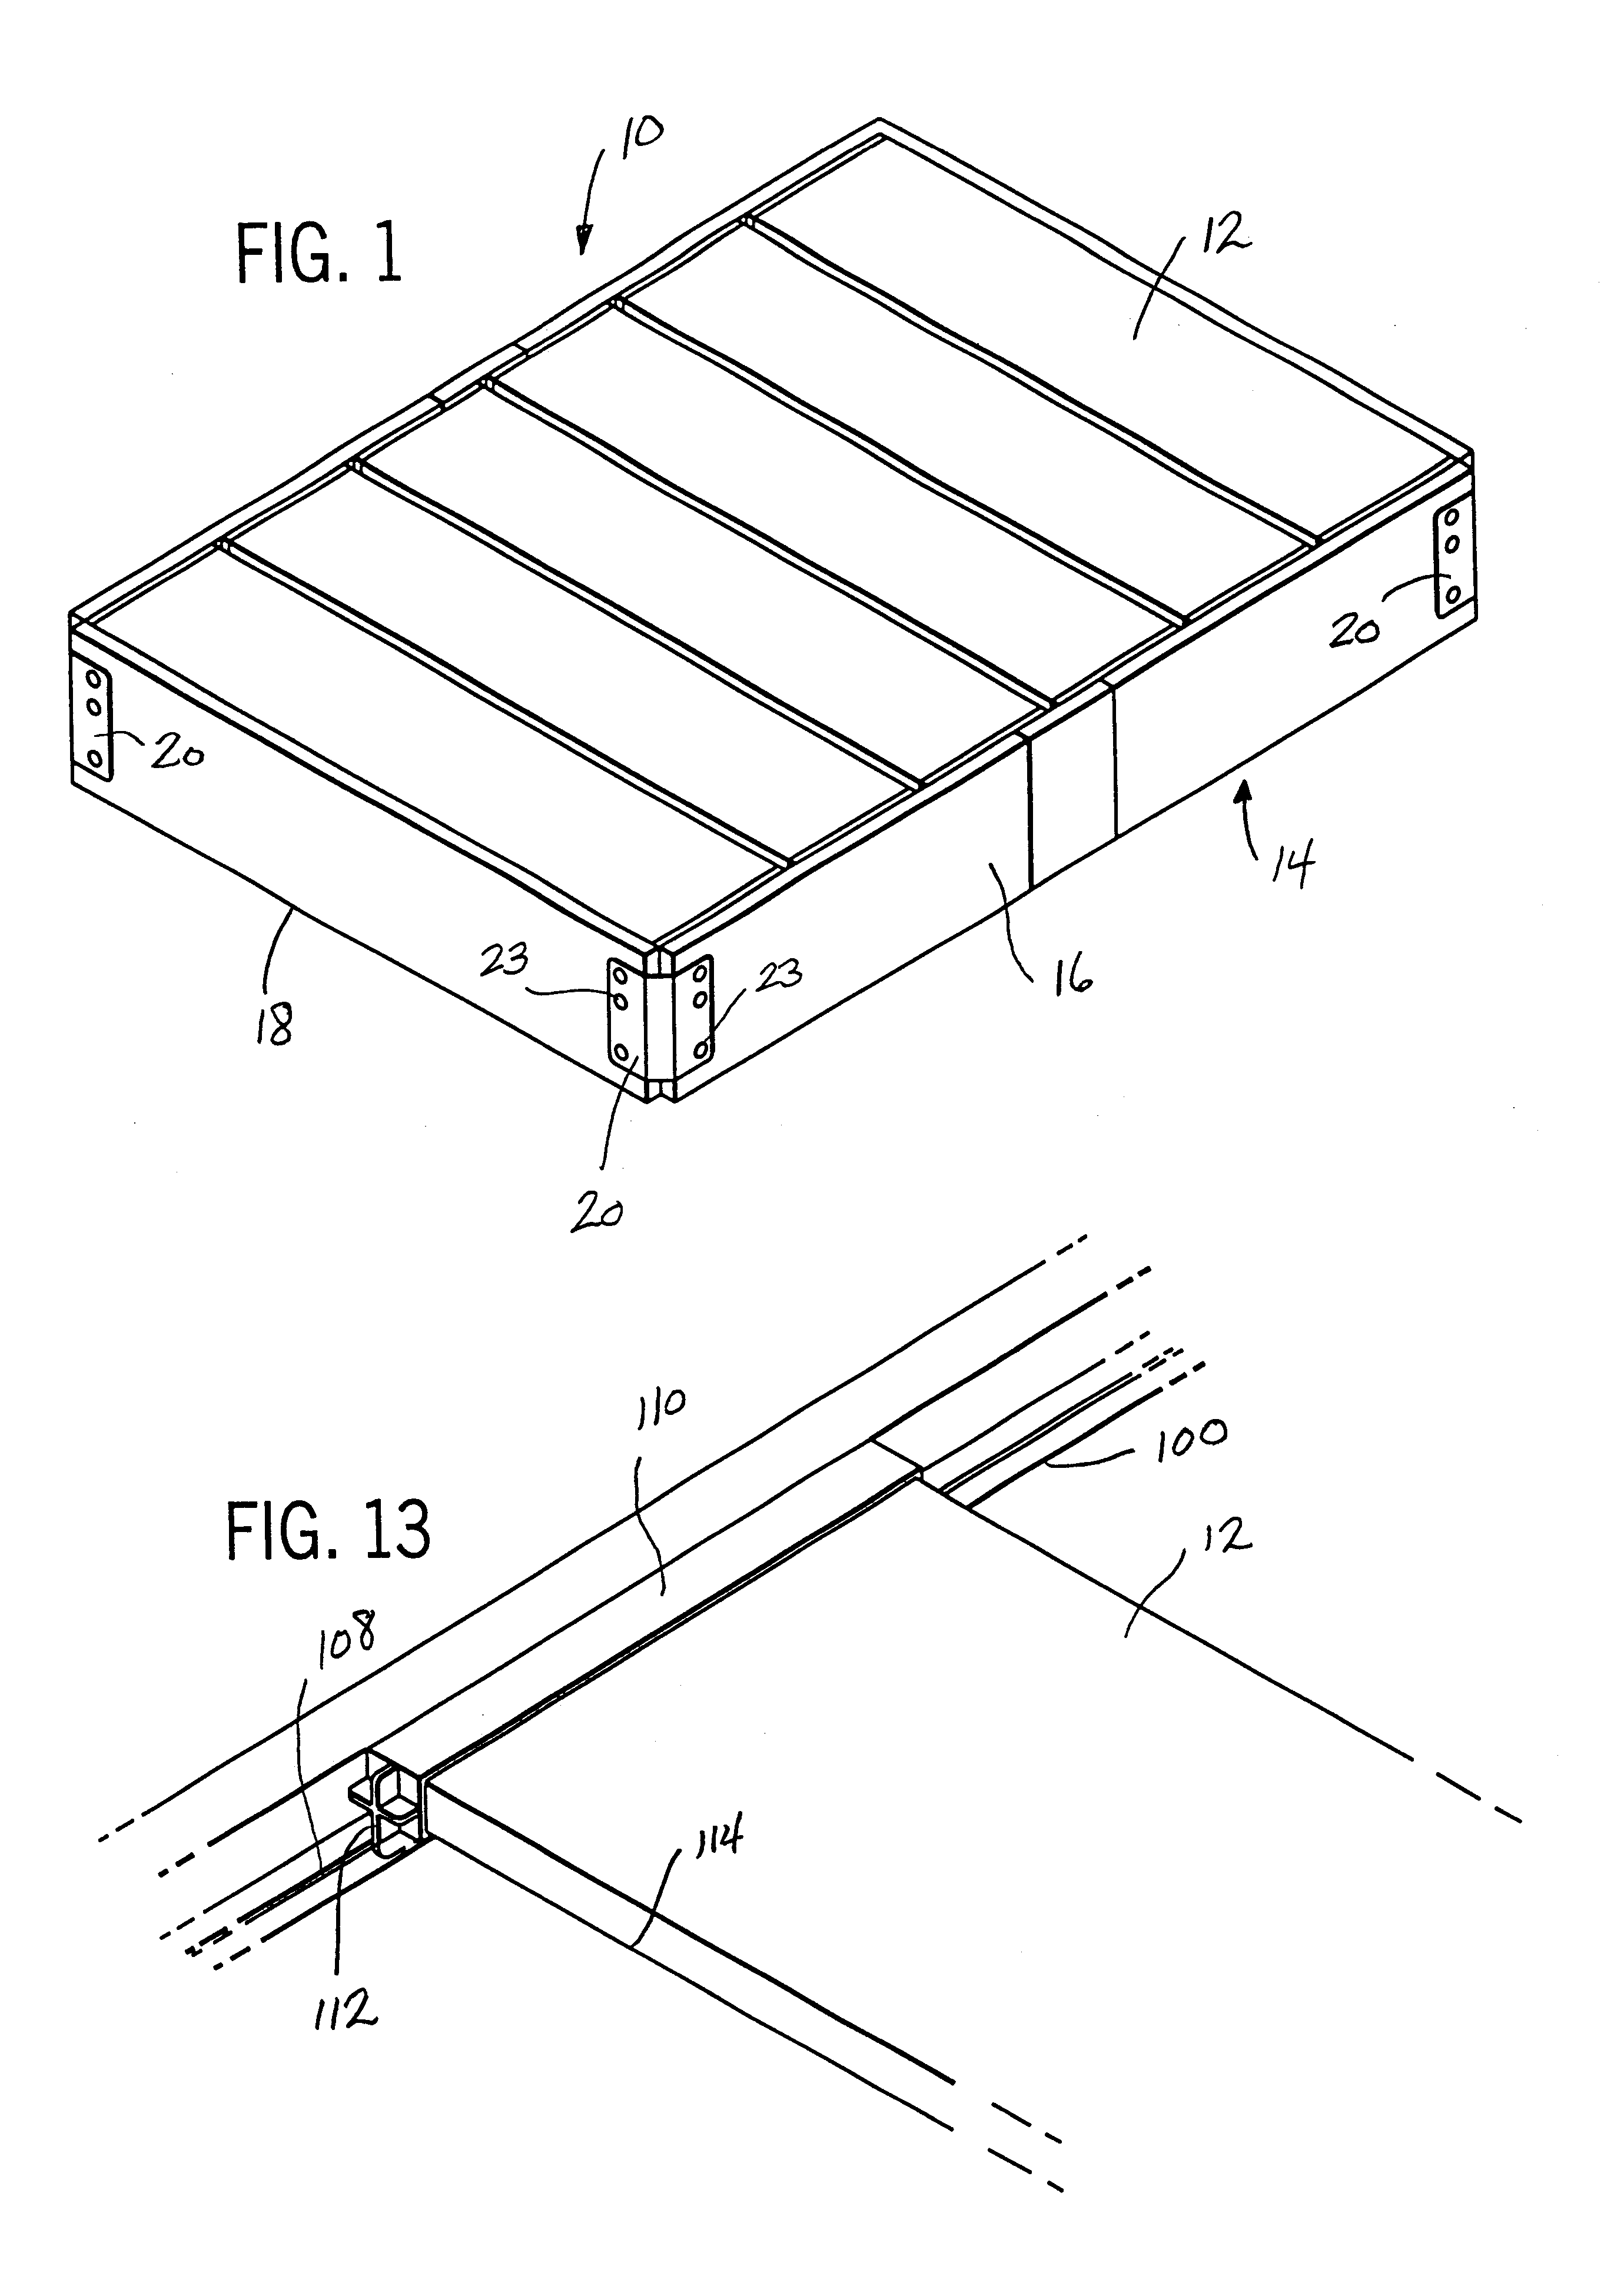 Extruded knock-down plastic bed frame assembly